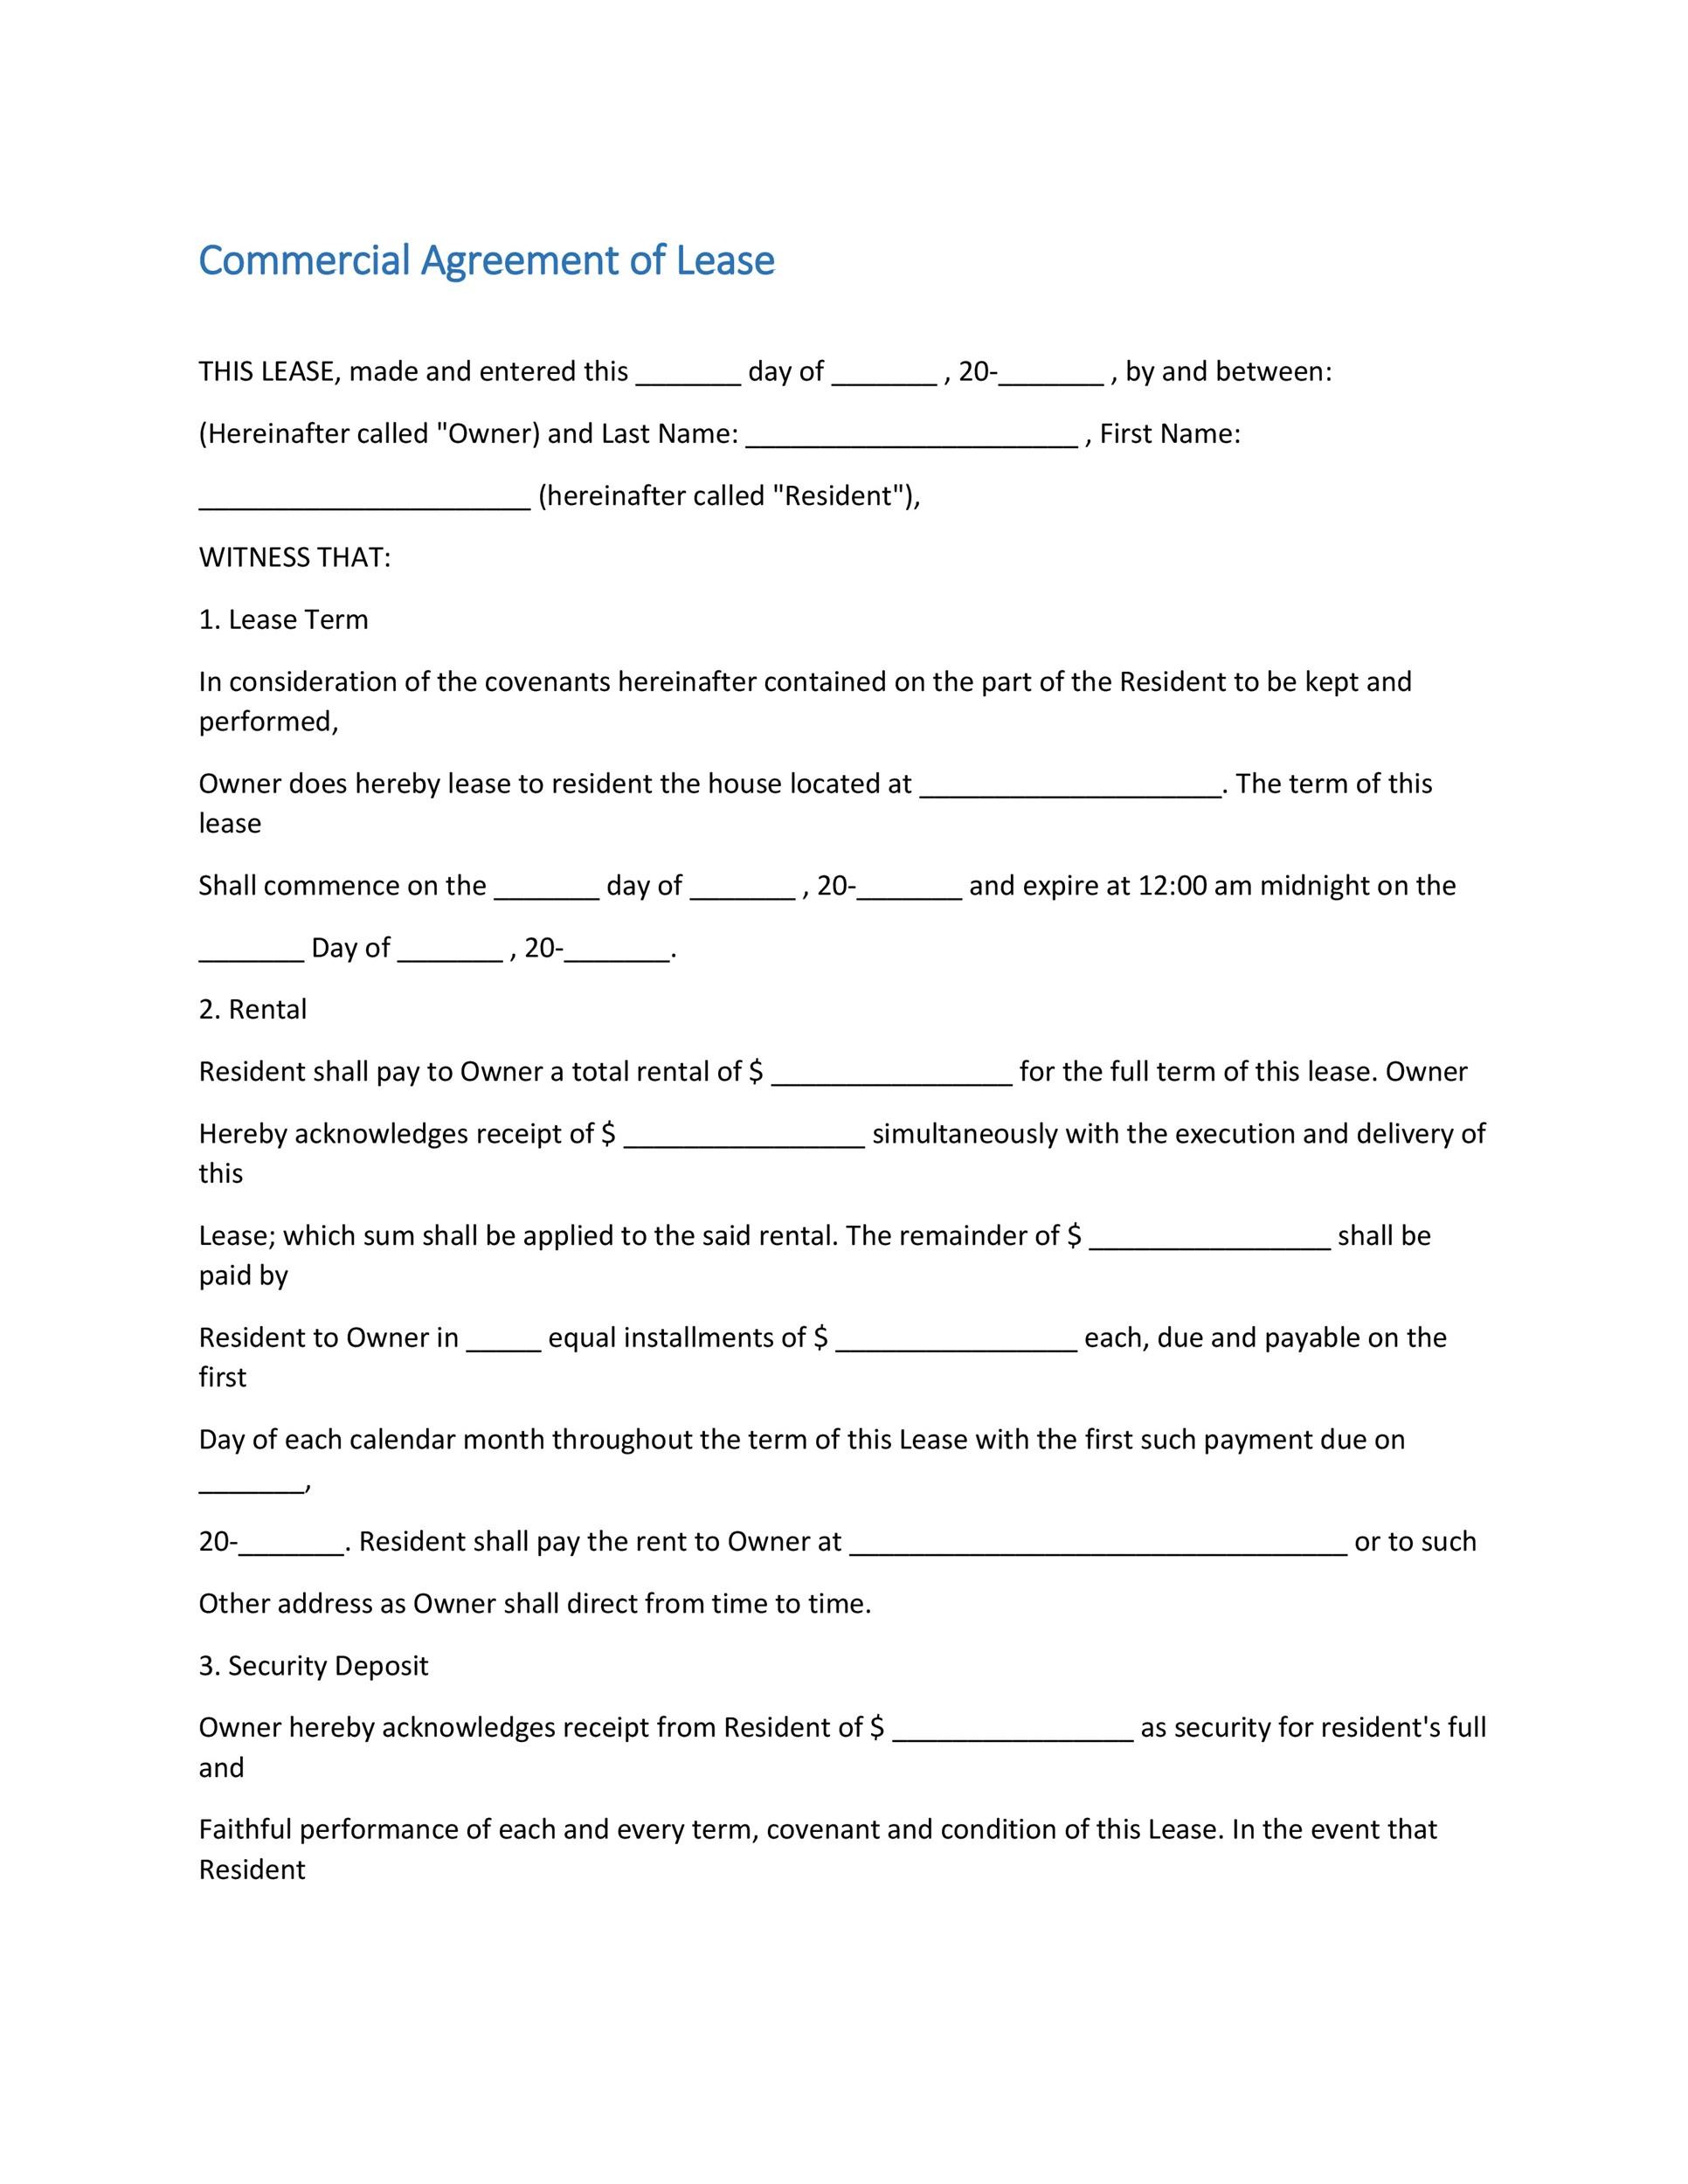 House Rental Agreement Format In English Pdf Home Sweet Home Modern